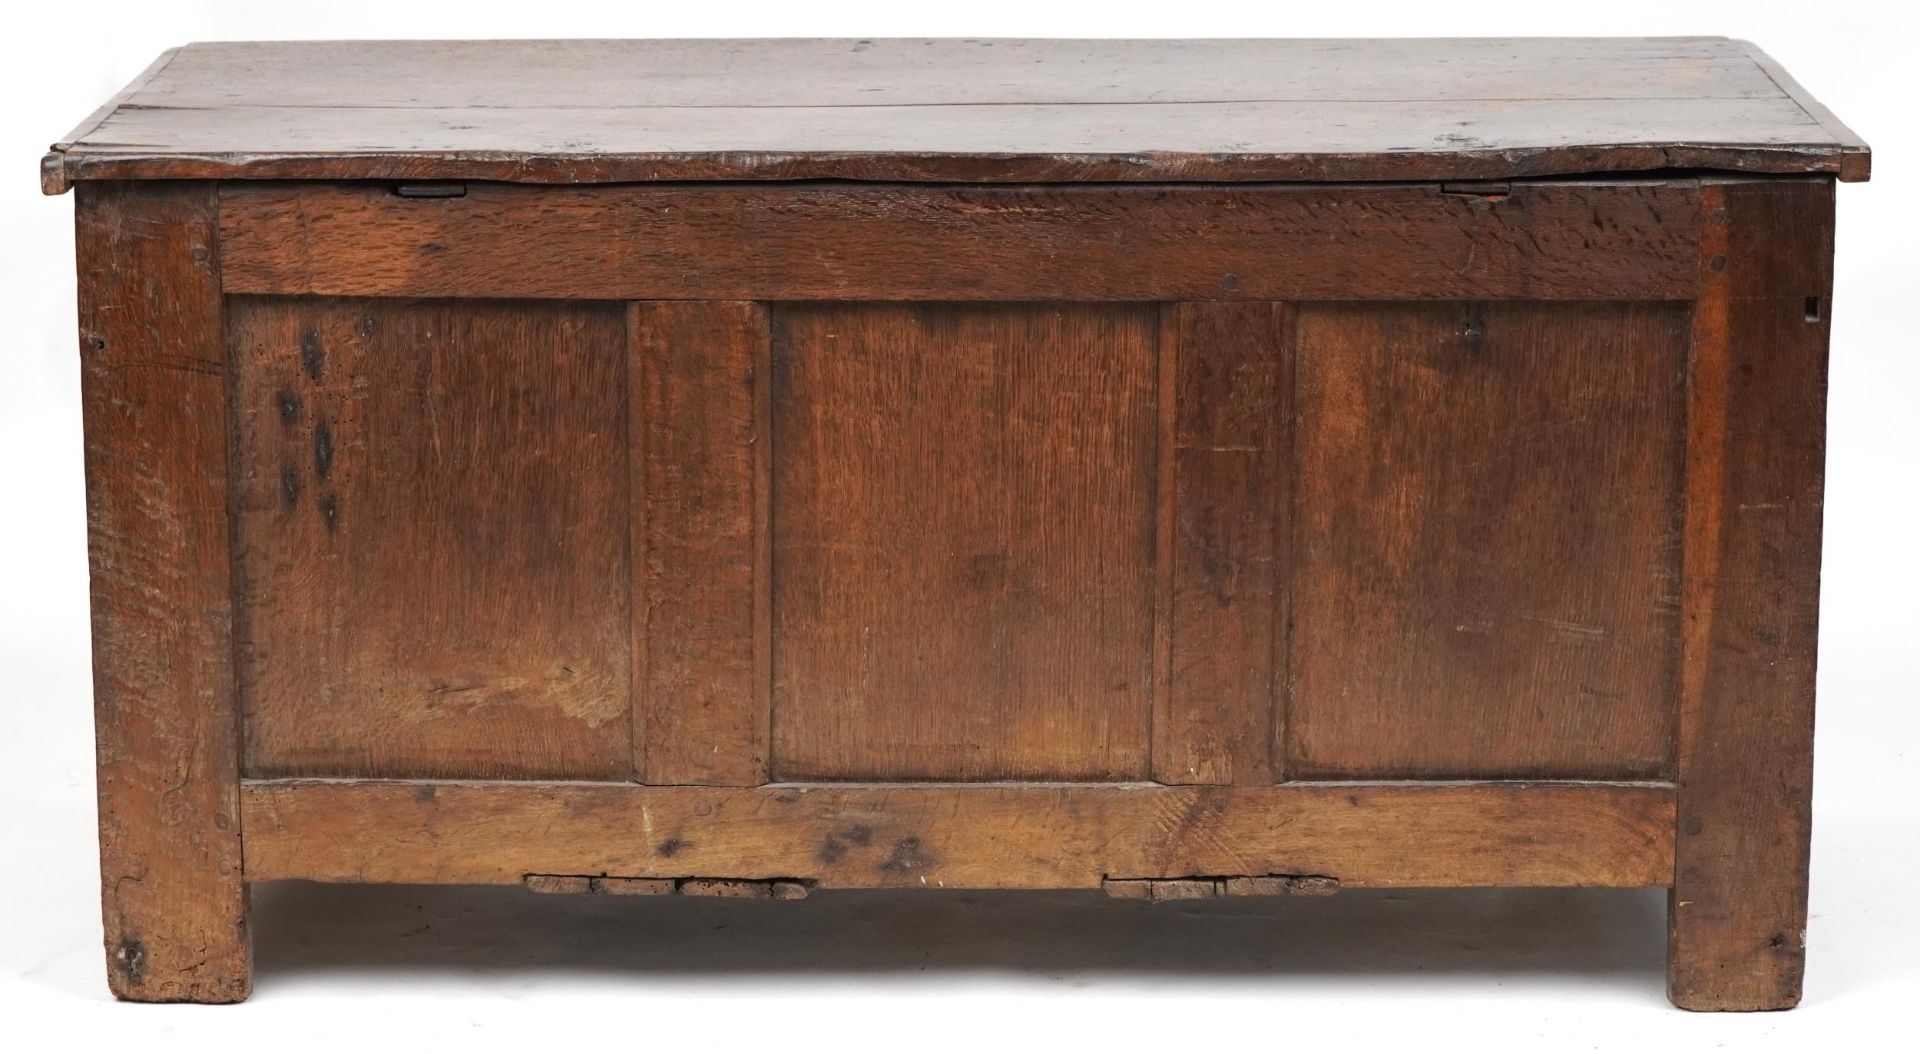 17th/18th century oak three panel coffer with carved borders, 59cm H x 118cm W x 51cm D - Image 6 of 6